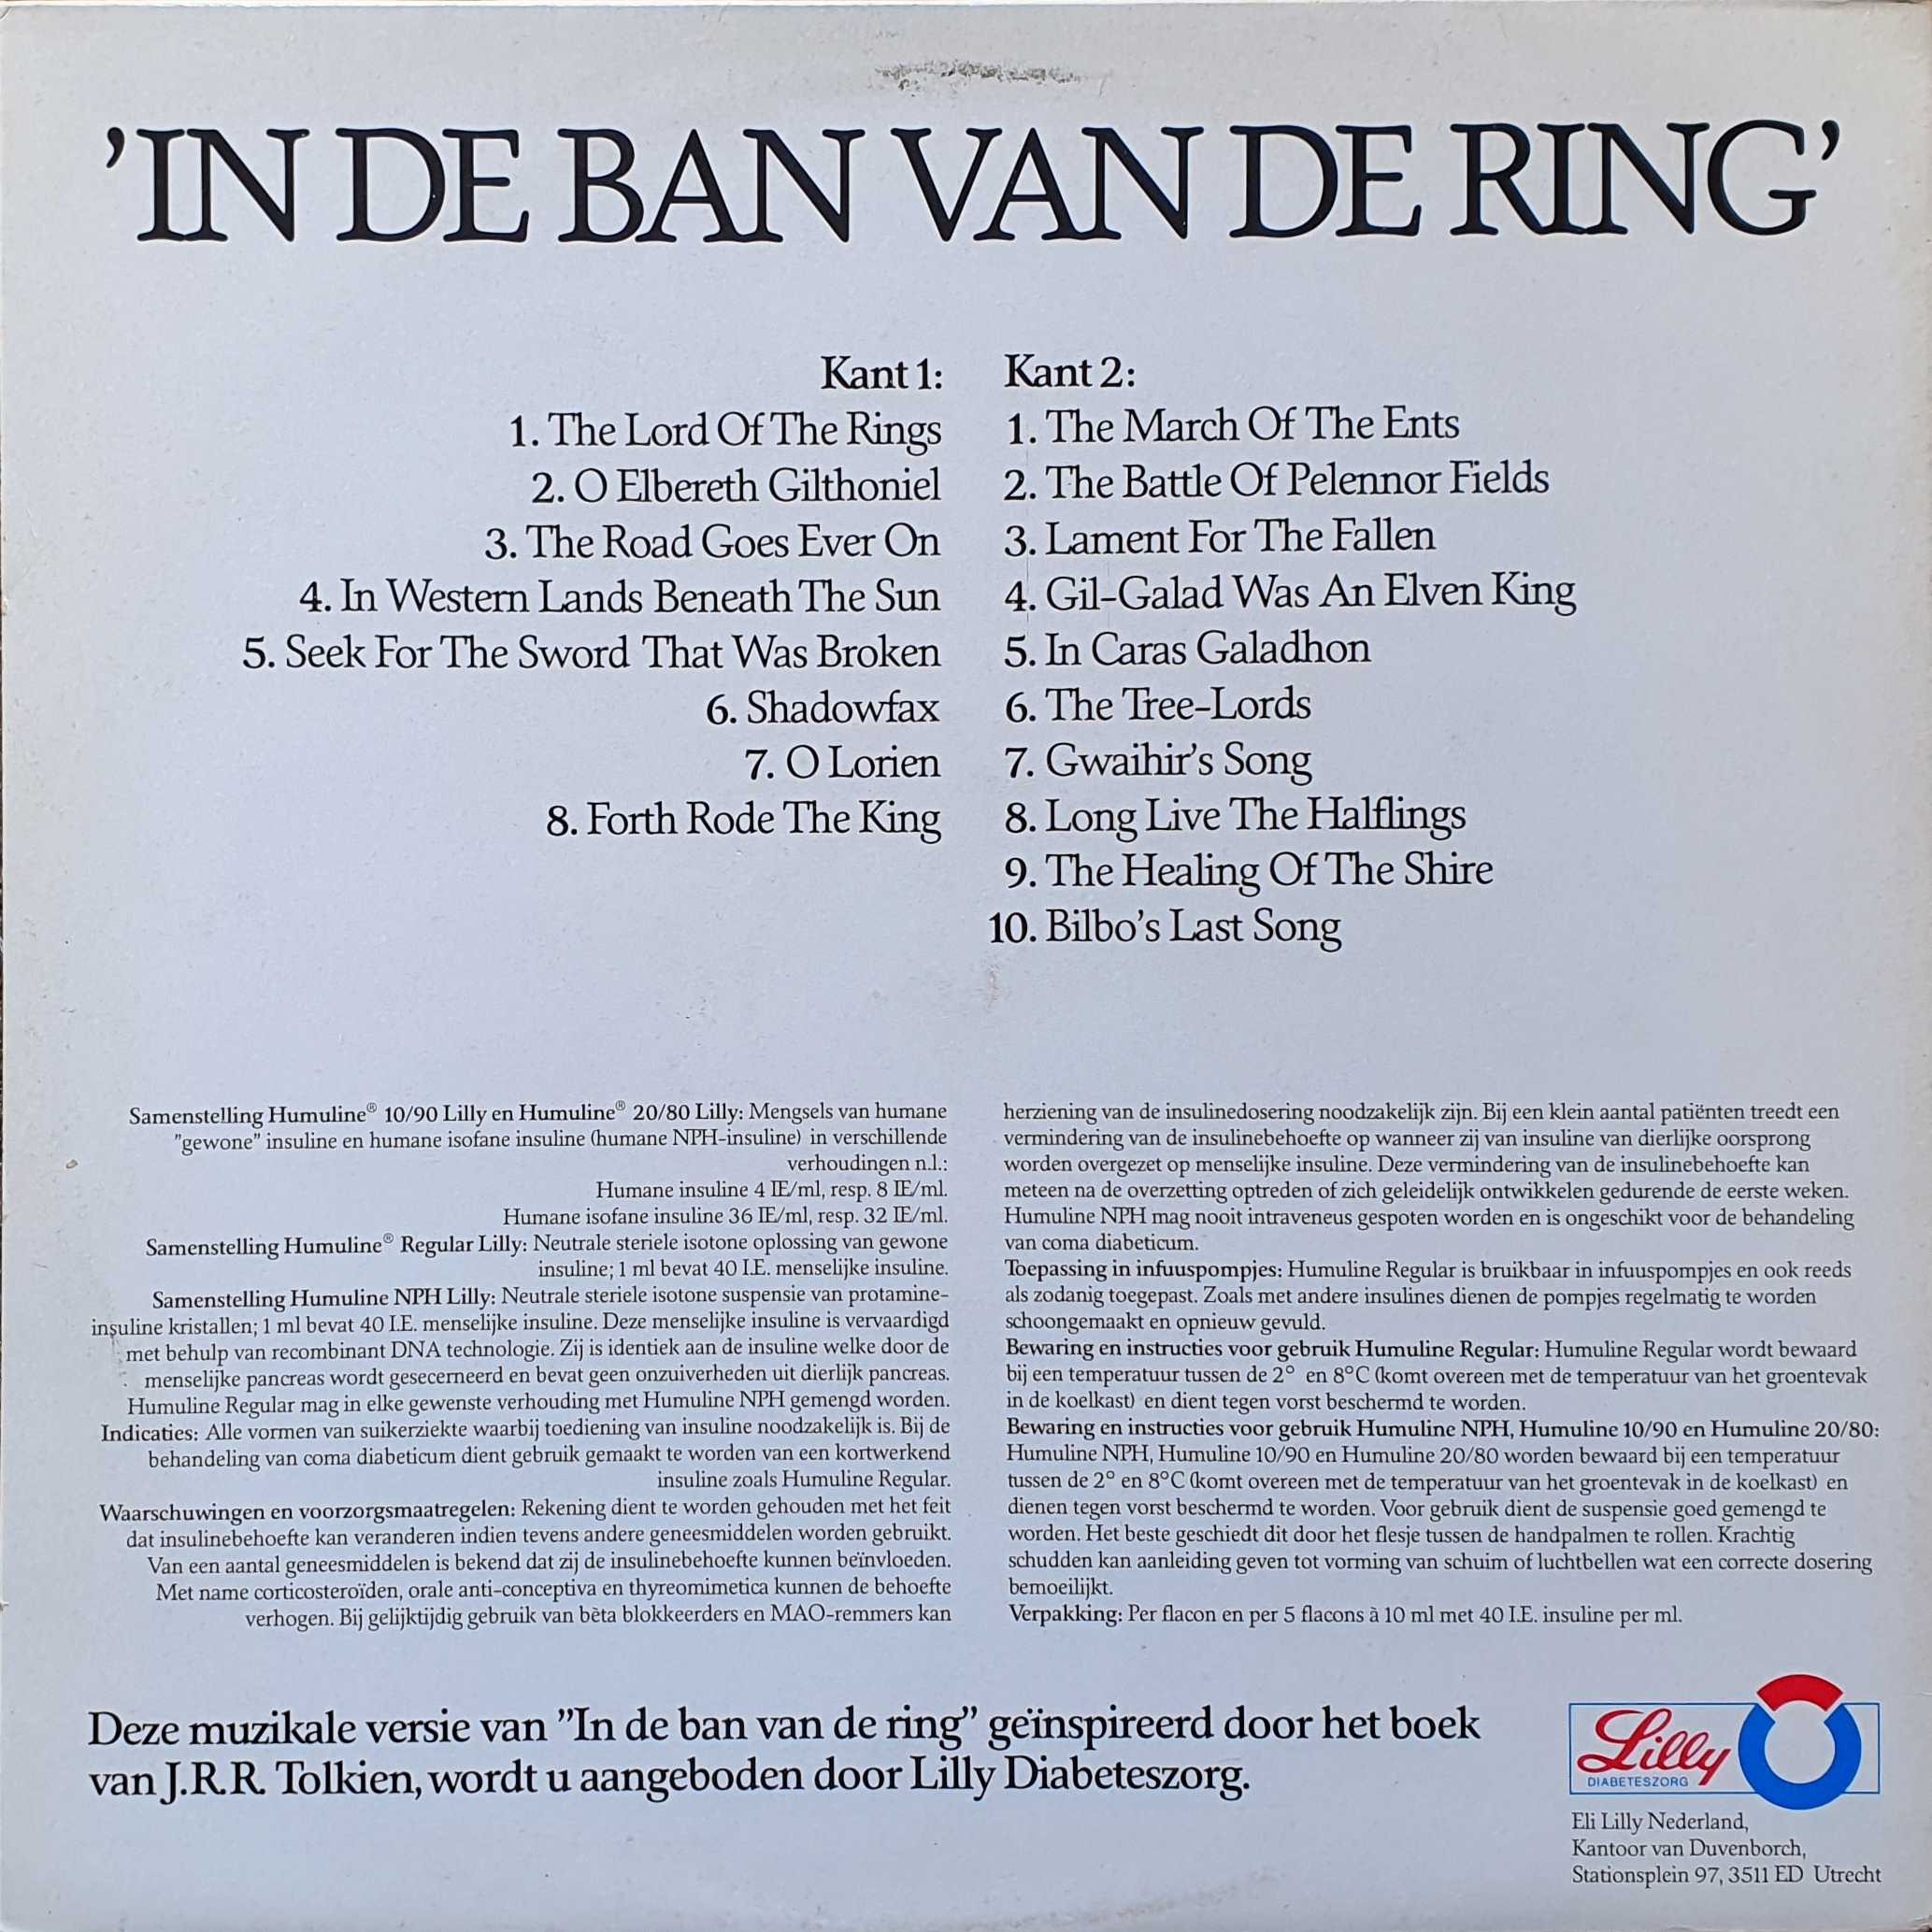 Picture of REH 415-iD In de ban van de ring by artist Various from the BBC records and Tapes library